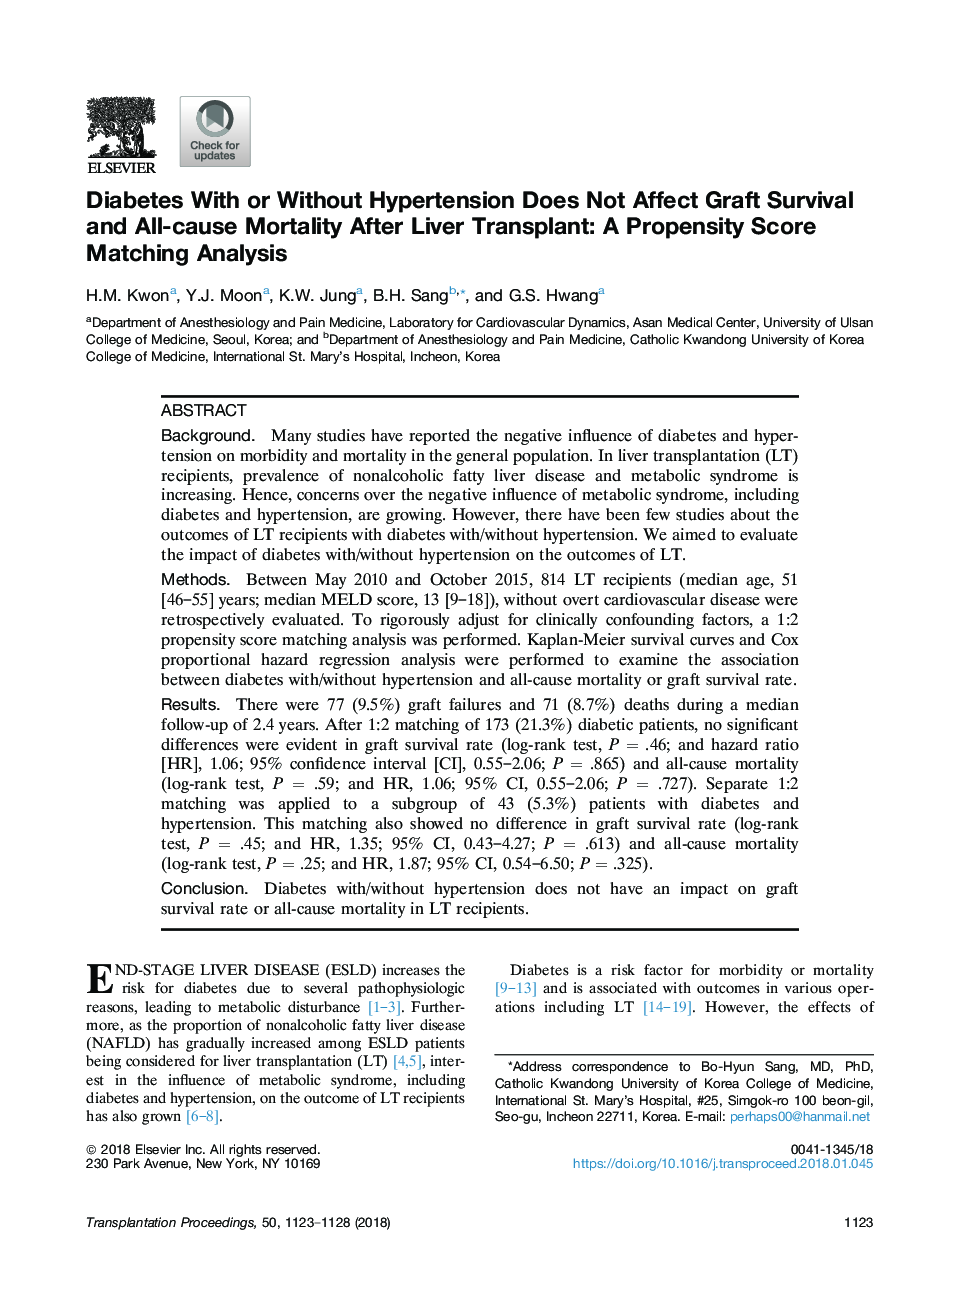 Diabetes With or Without Hypertension Does Not Affect Graft Survival and All-cause Mortality After Liver Transplant: A Propensity Score Matching Analysis